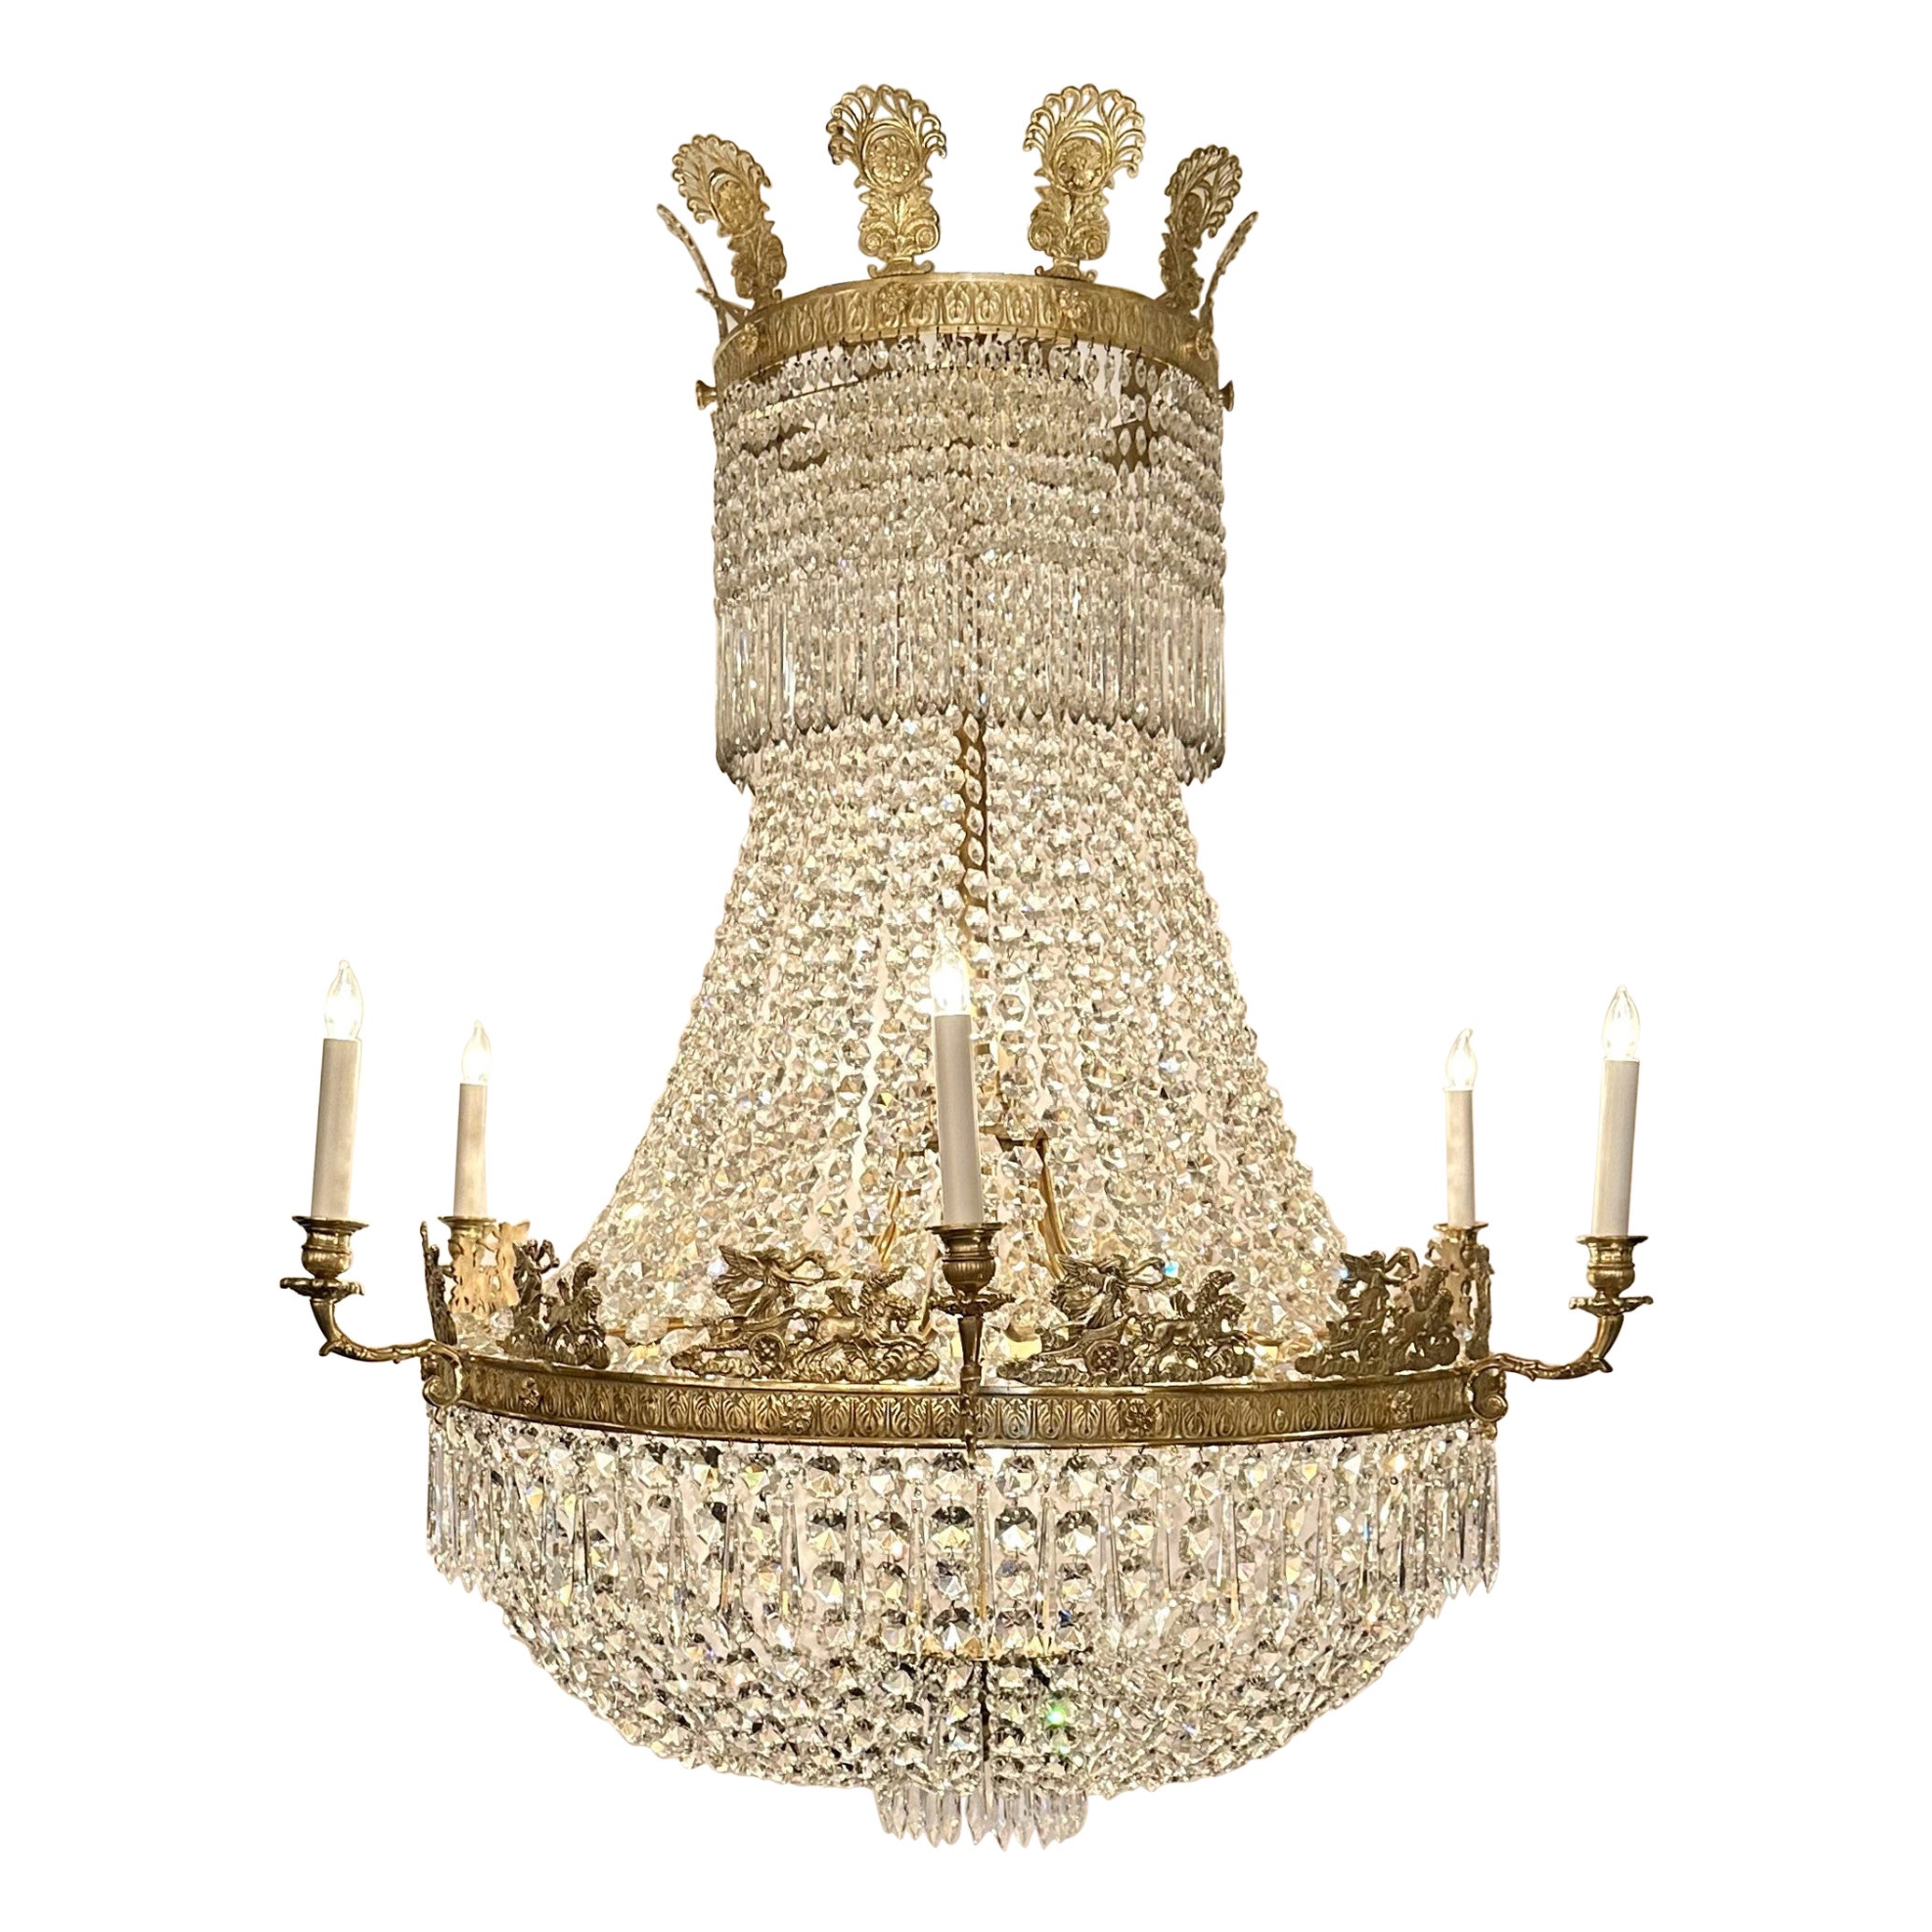 Antique 19th Century French Empire Baccarat Crystal and Ormolu Chandelier.